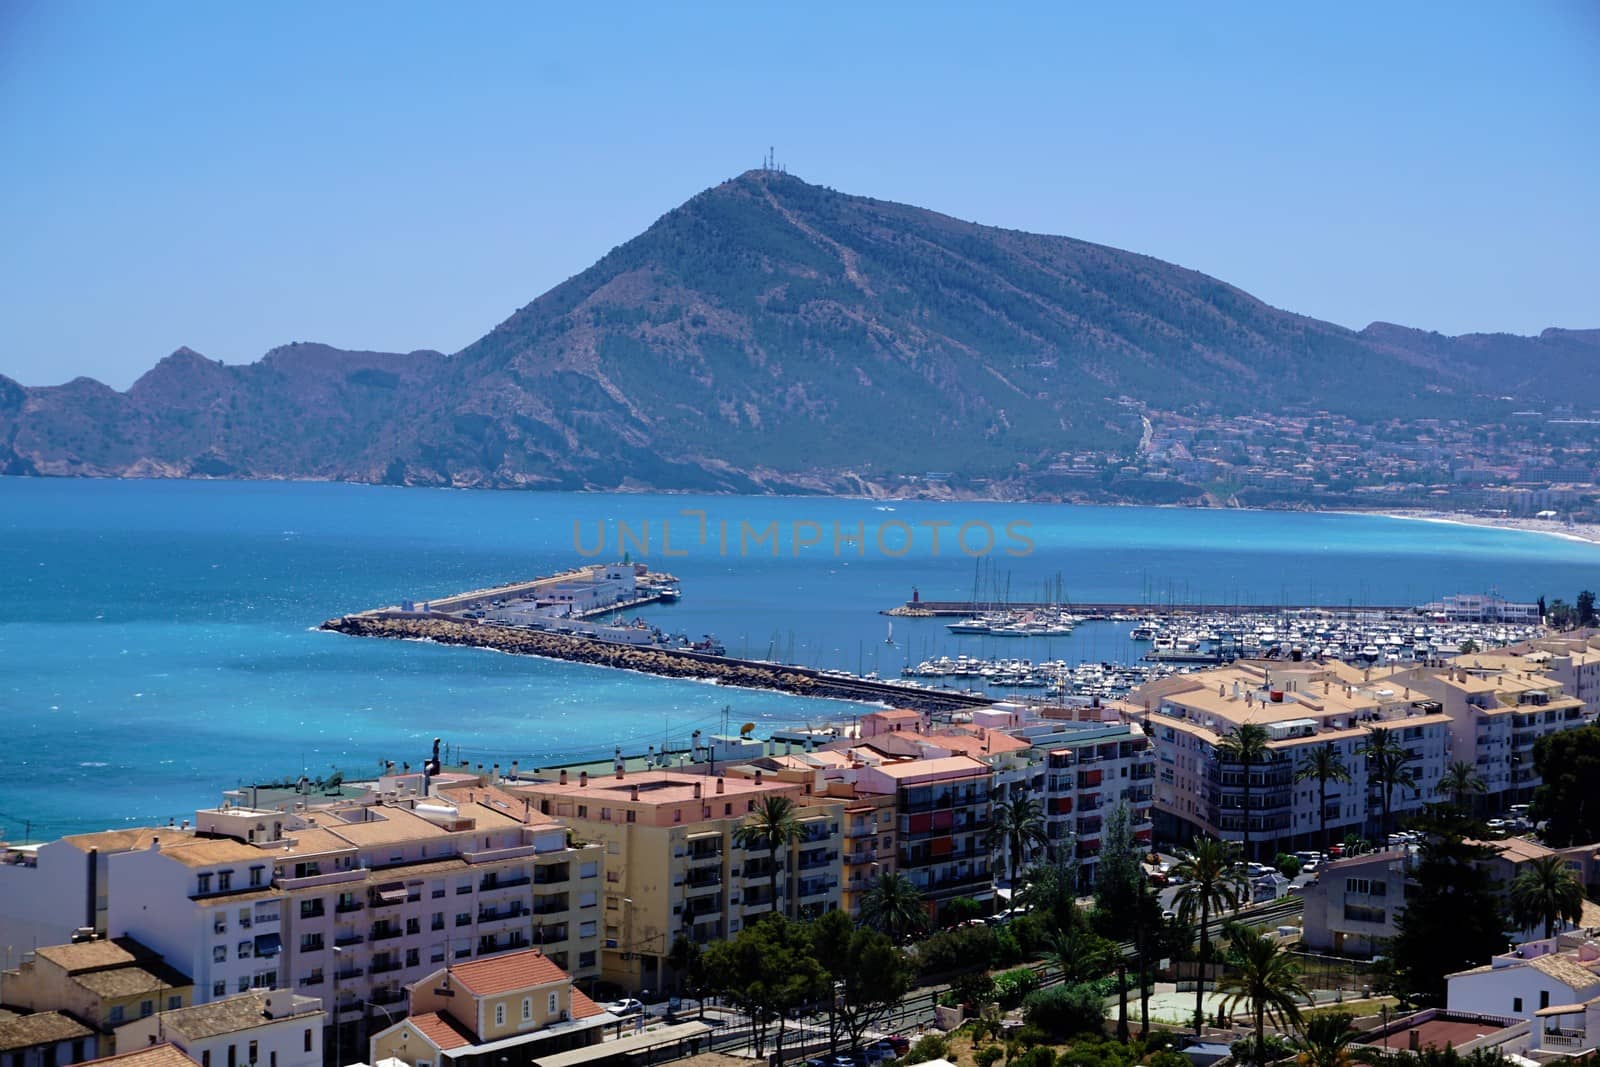 View over the port of Altea, Spain to a mountain